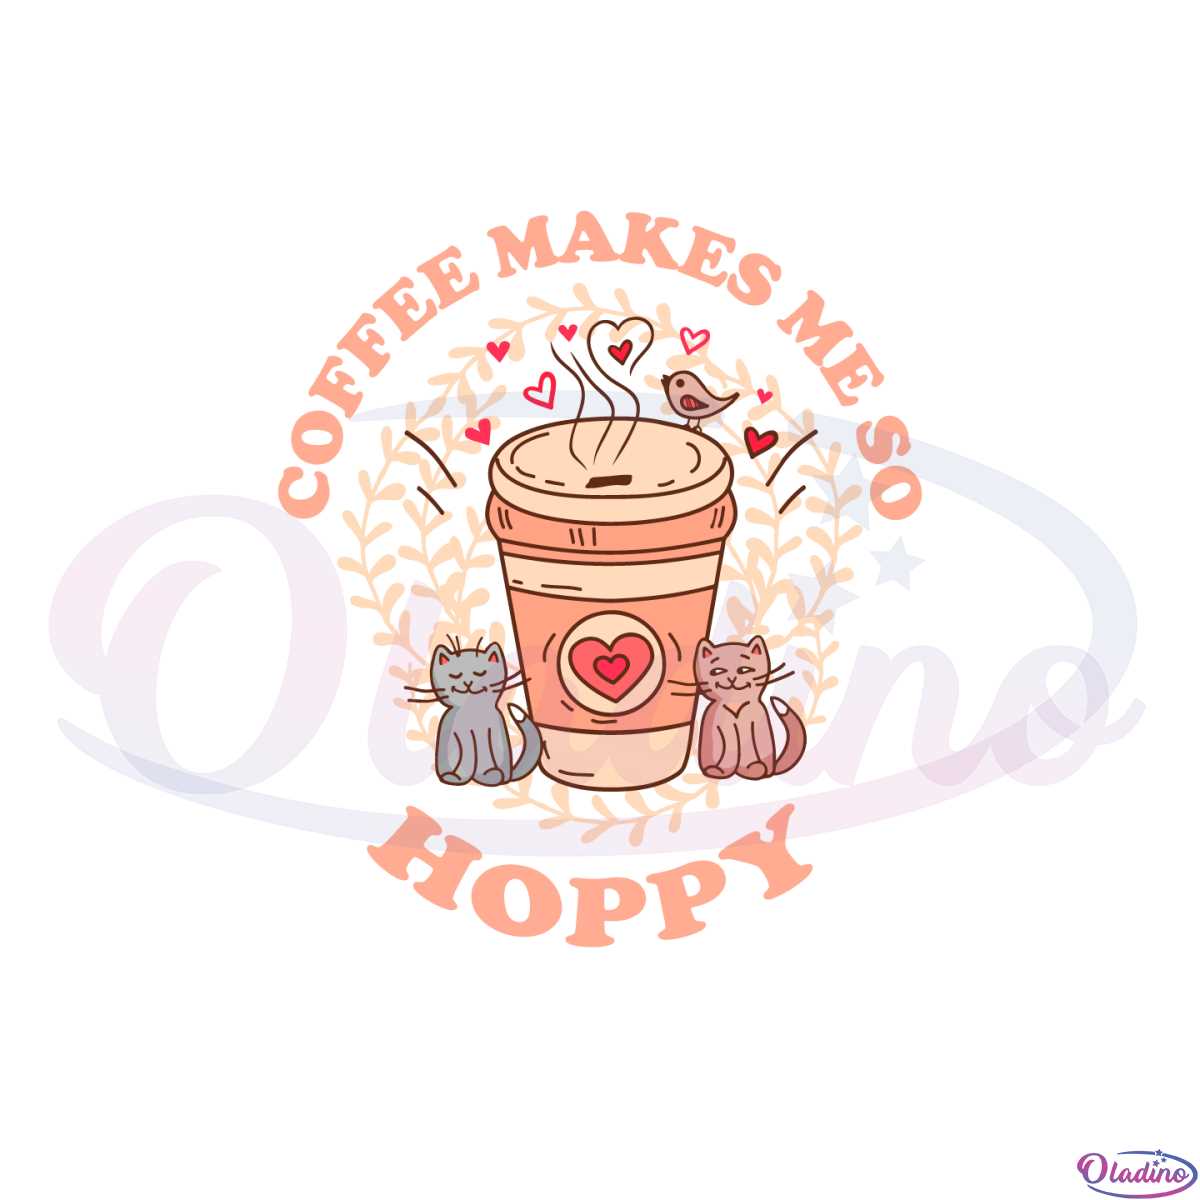 vintage-easter-coffee-makes-me-so-hoppy-svg-cutting-files